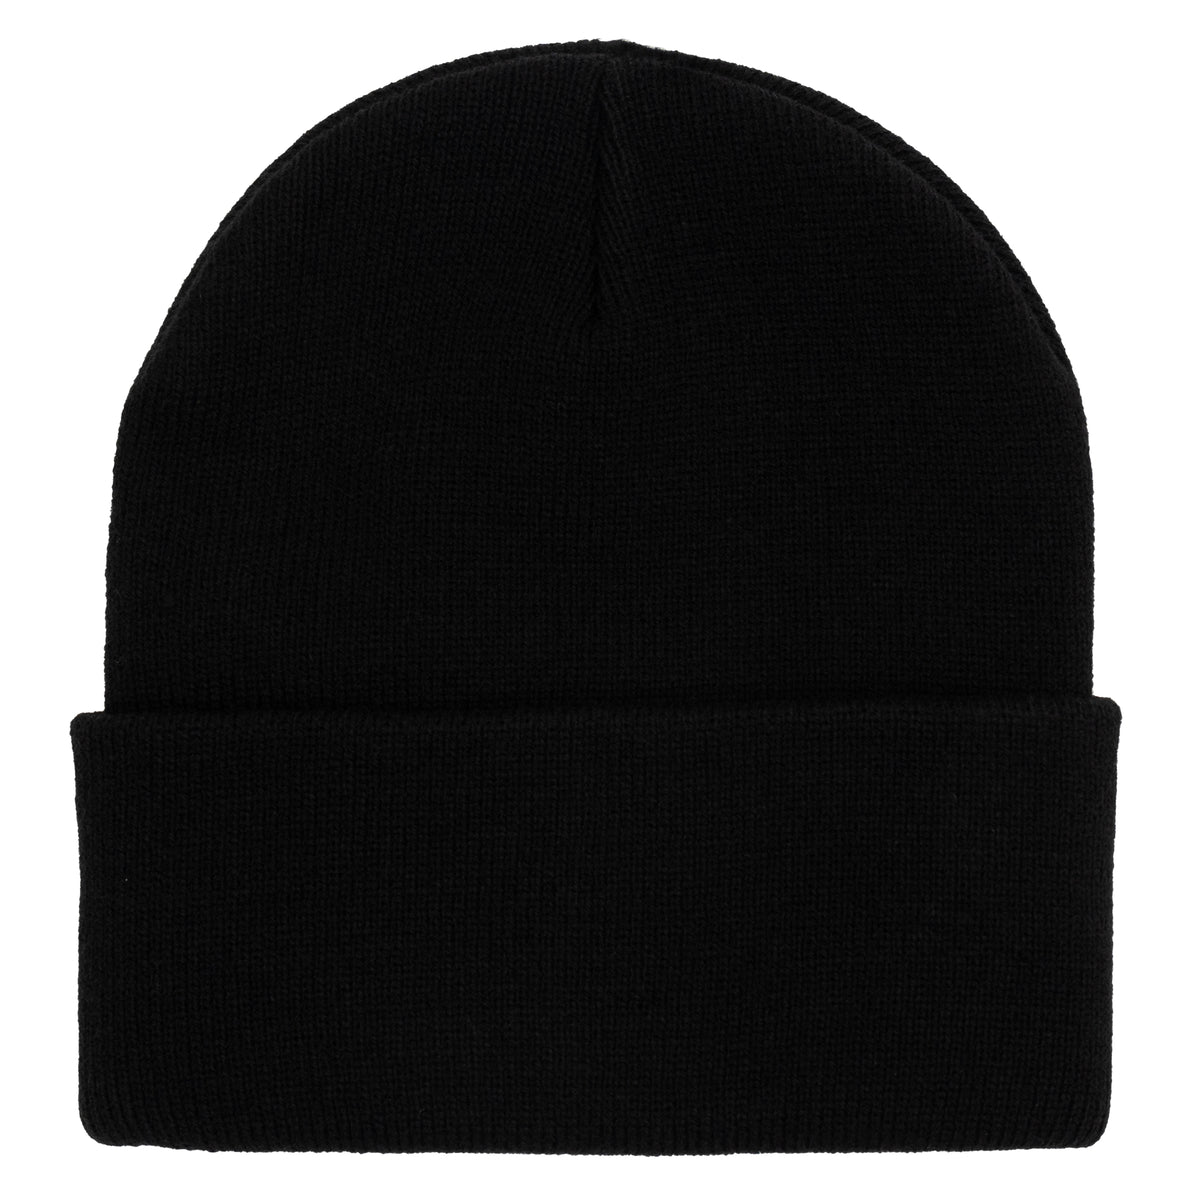 Load image into Gallery viewer, Carhartt WIP Black Acrylic Short Watch Beanie
